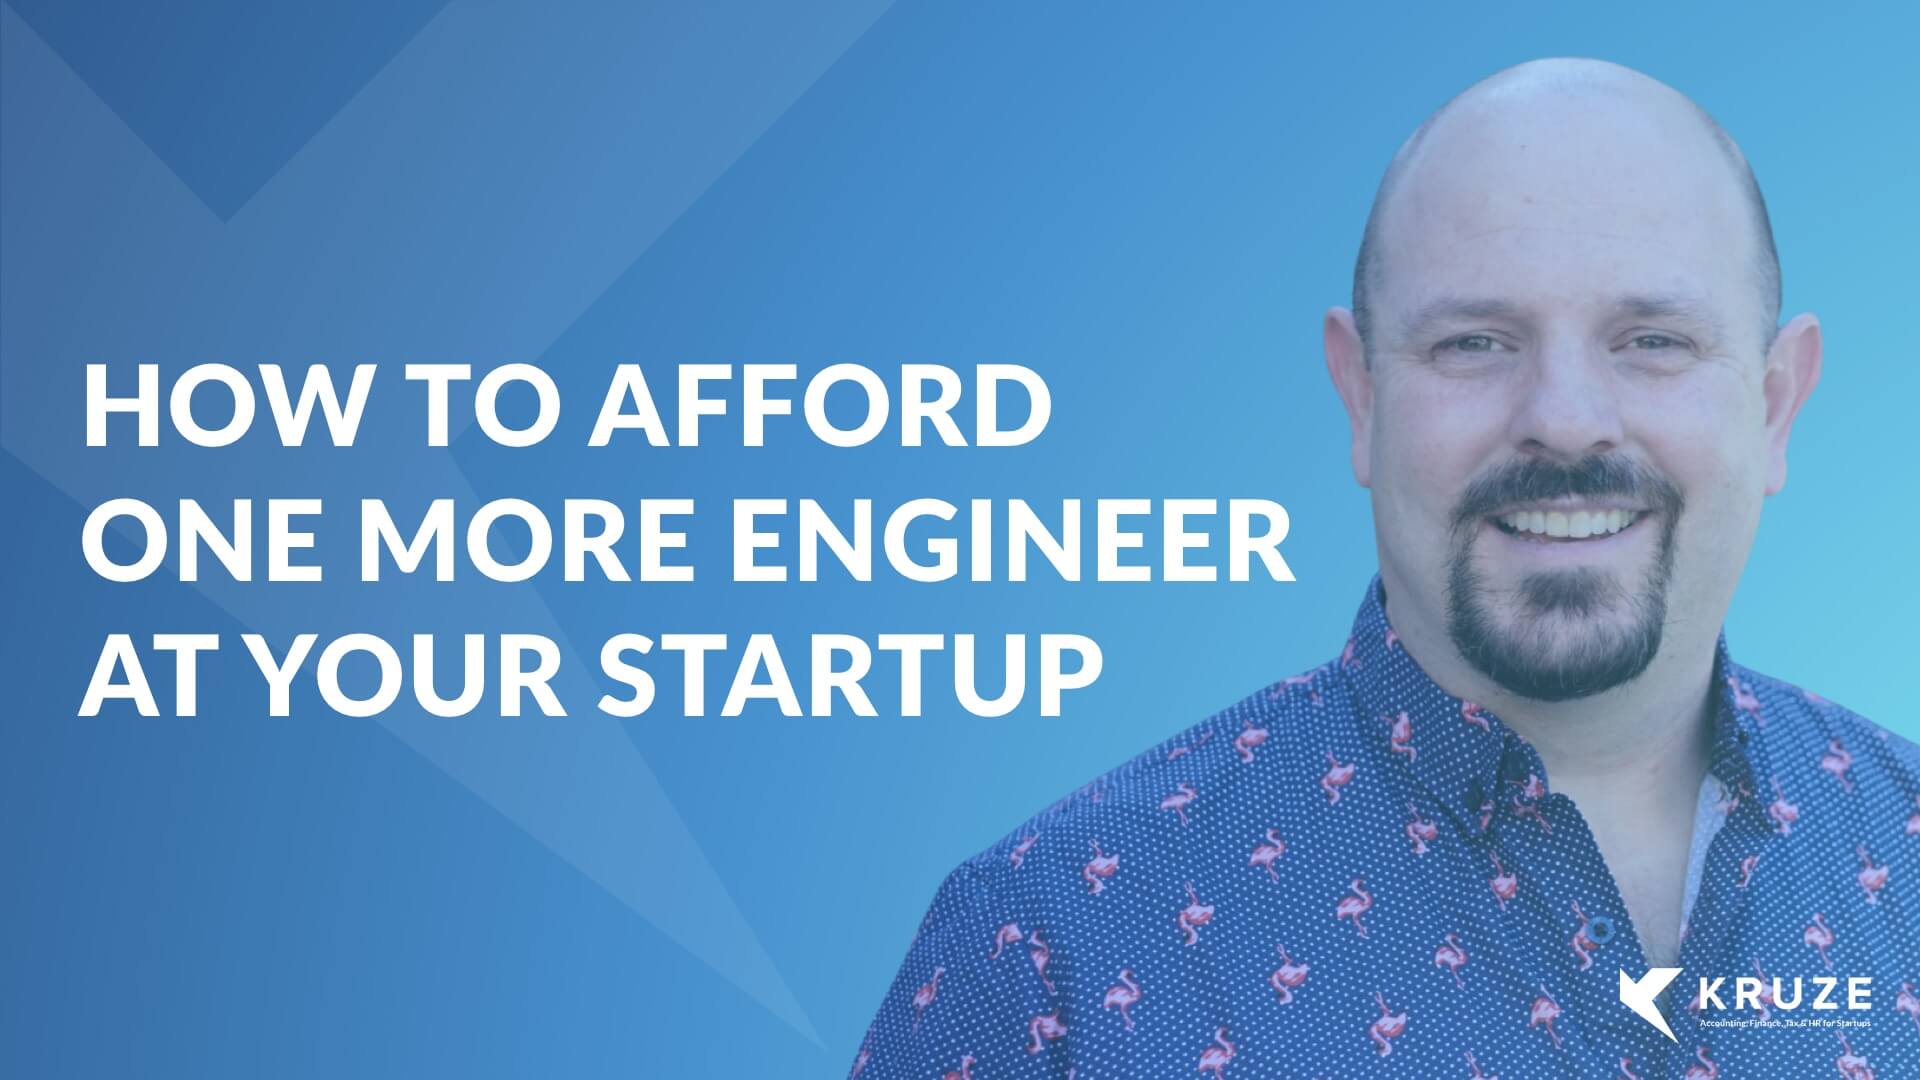 How Your Startup Can Afford One More Engineer